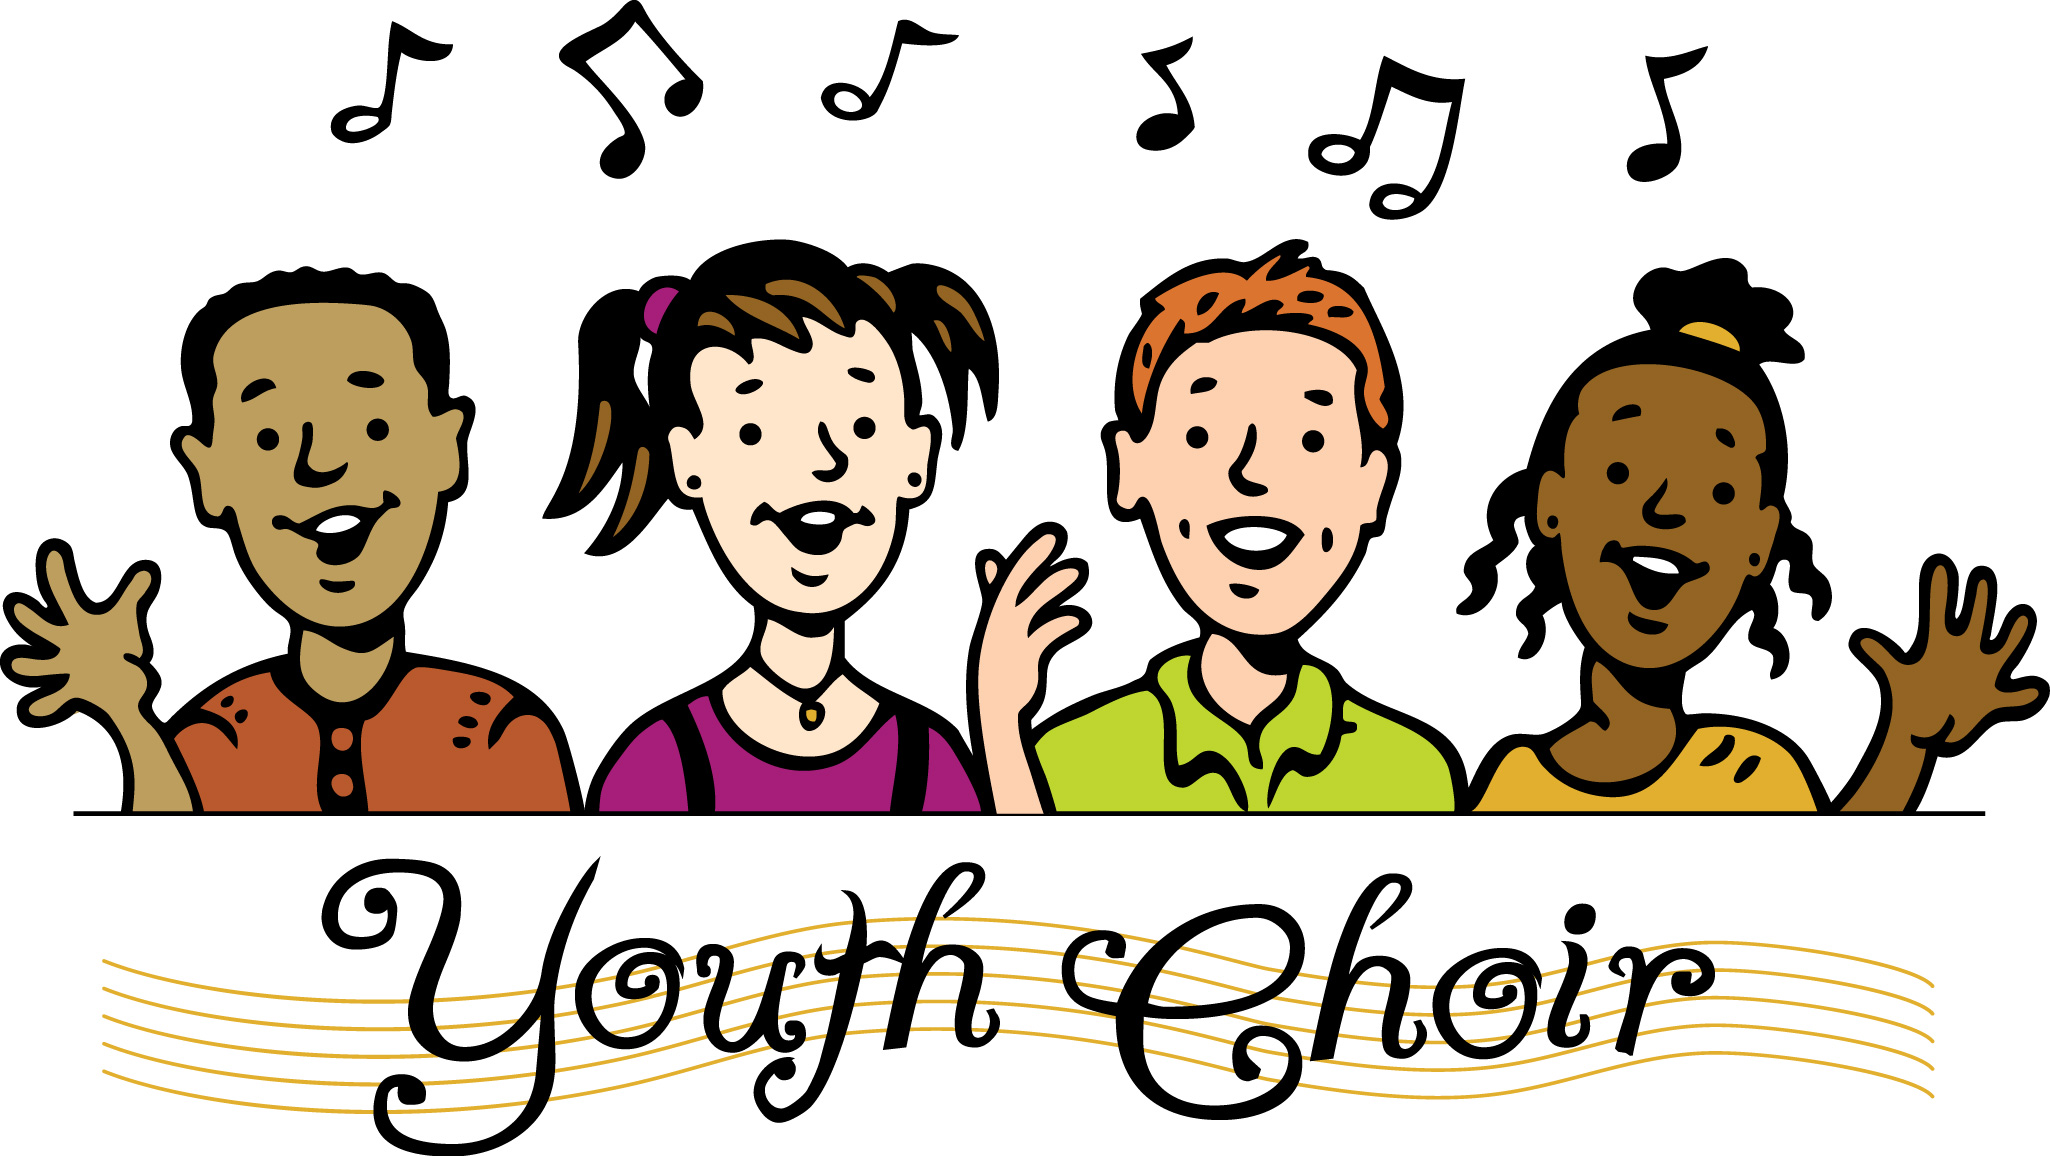 Free Choir Image Images Free Download Png Clipart